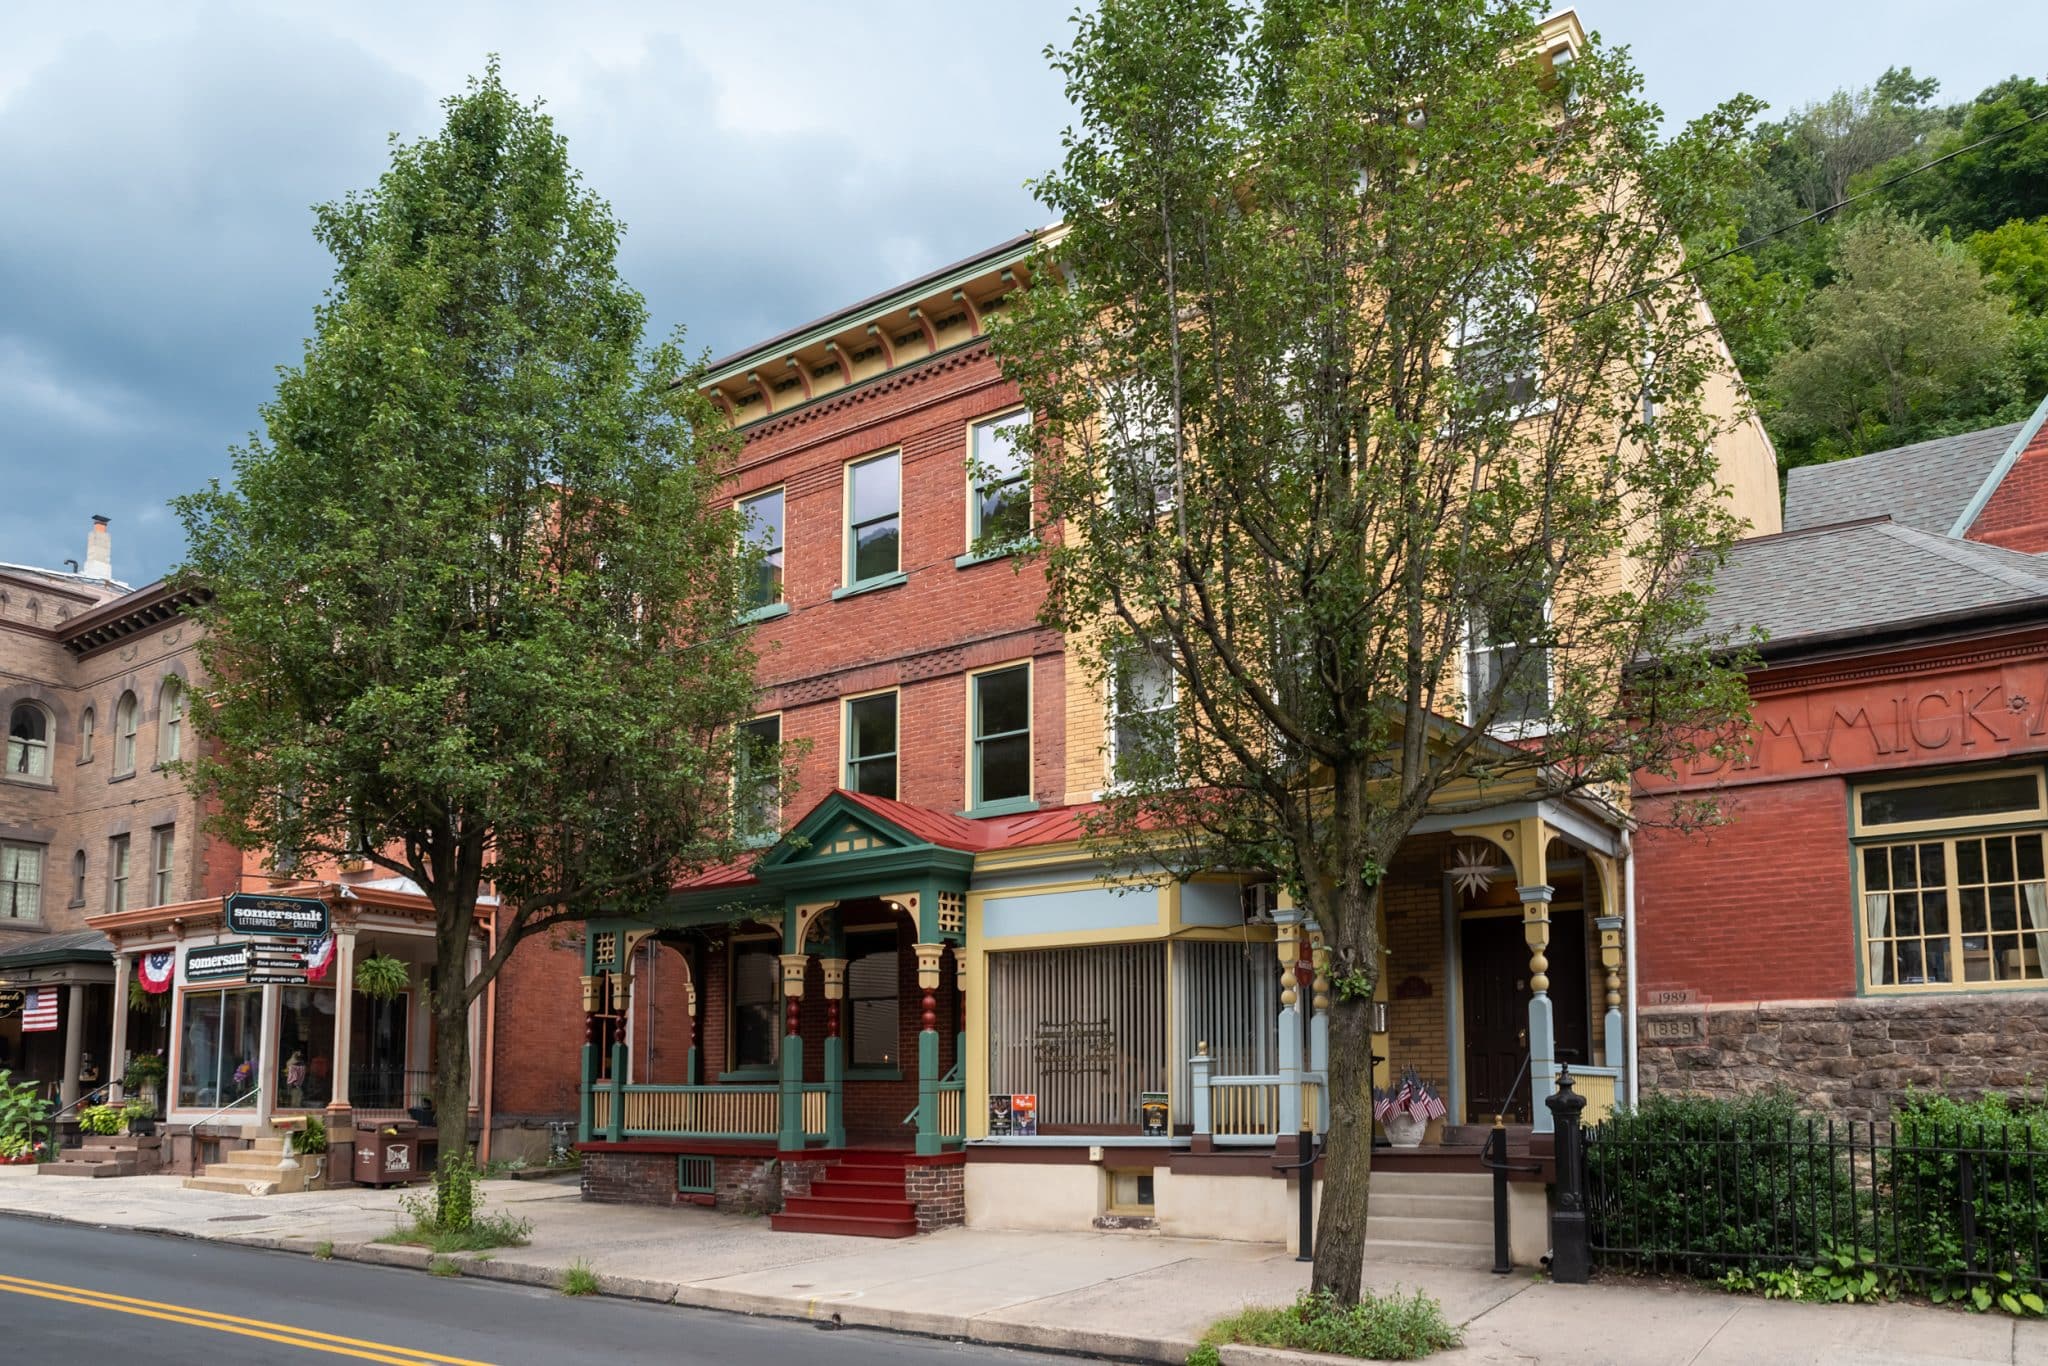 Jim Thorpe, PA, USA - August 18, 2019: Historic streets at Jim Thorpe, a borough and the county seat of Carbon County in state of Pennsylvania. United states